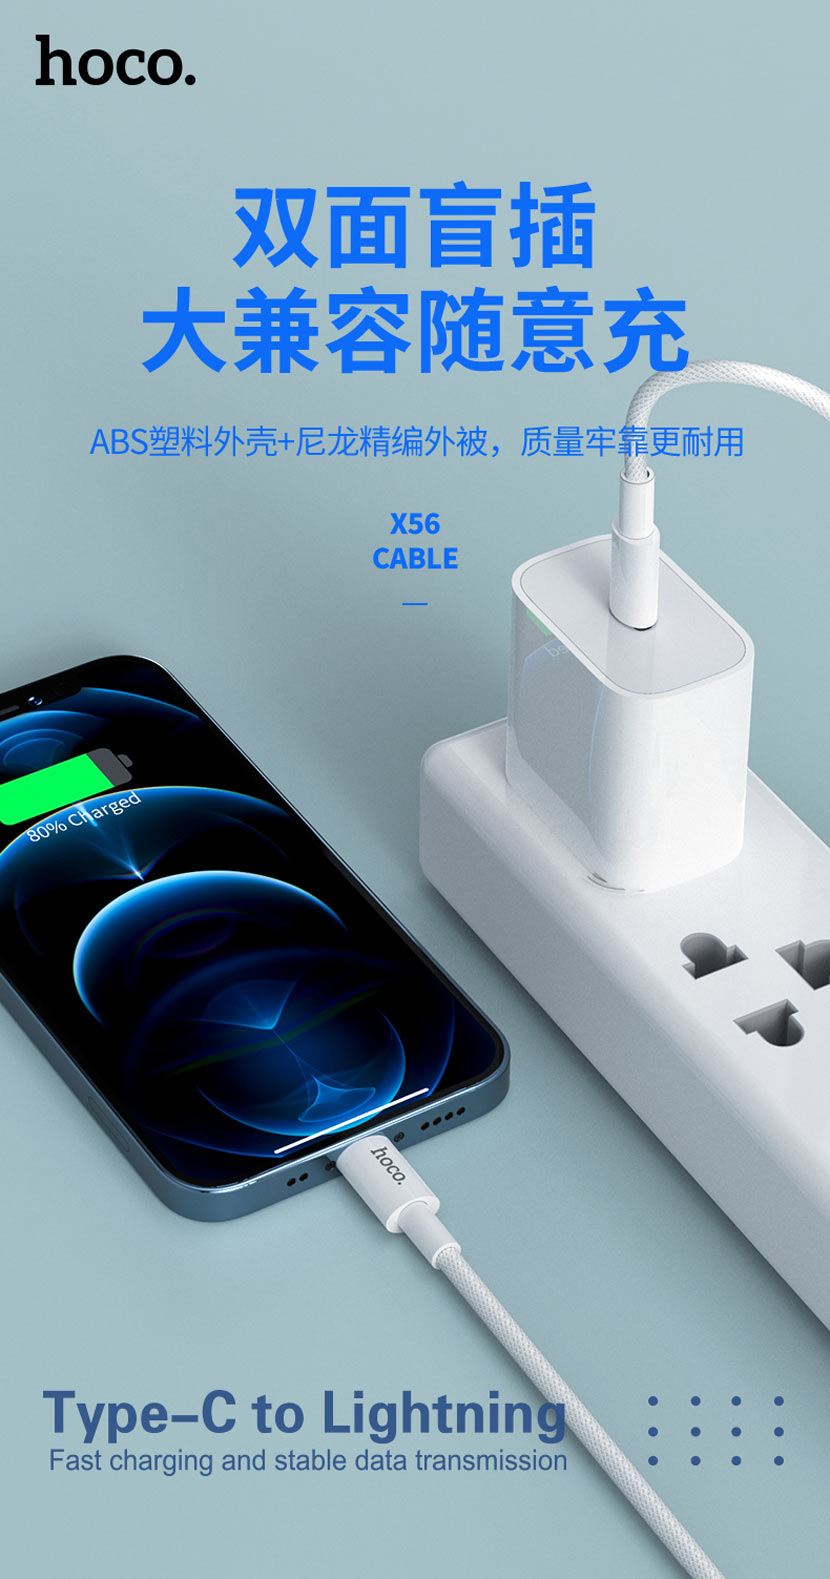 hoco news x56 new original pd charging data cable lightning compatibility cn